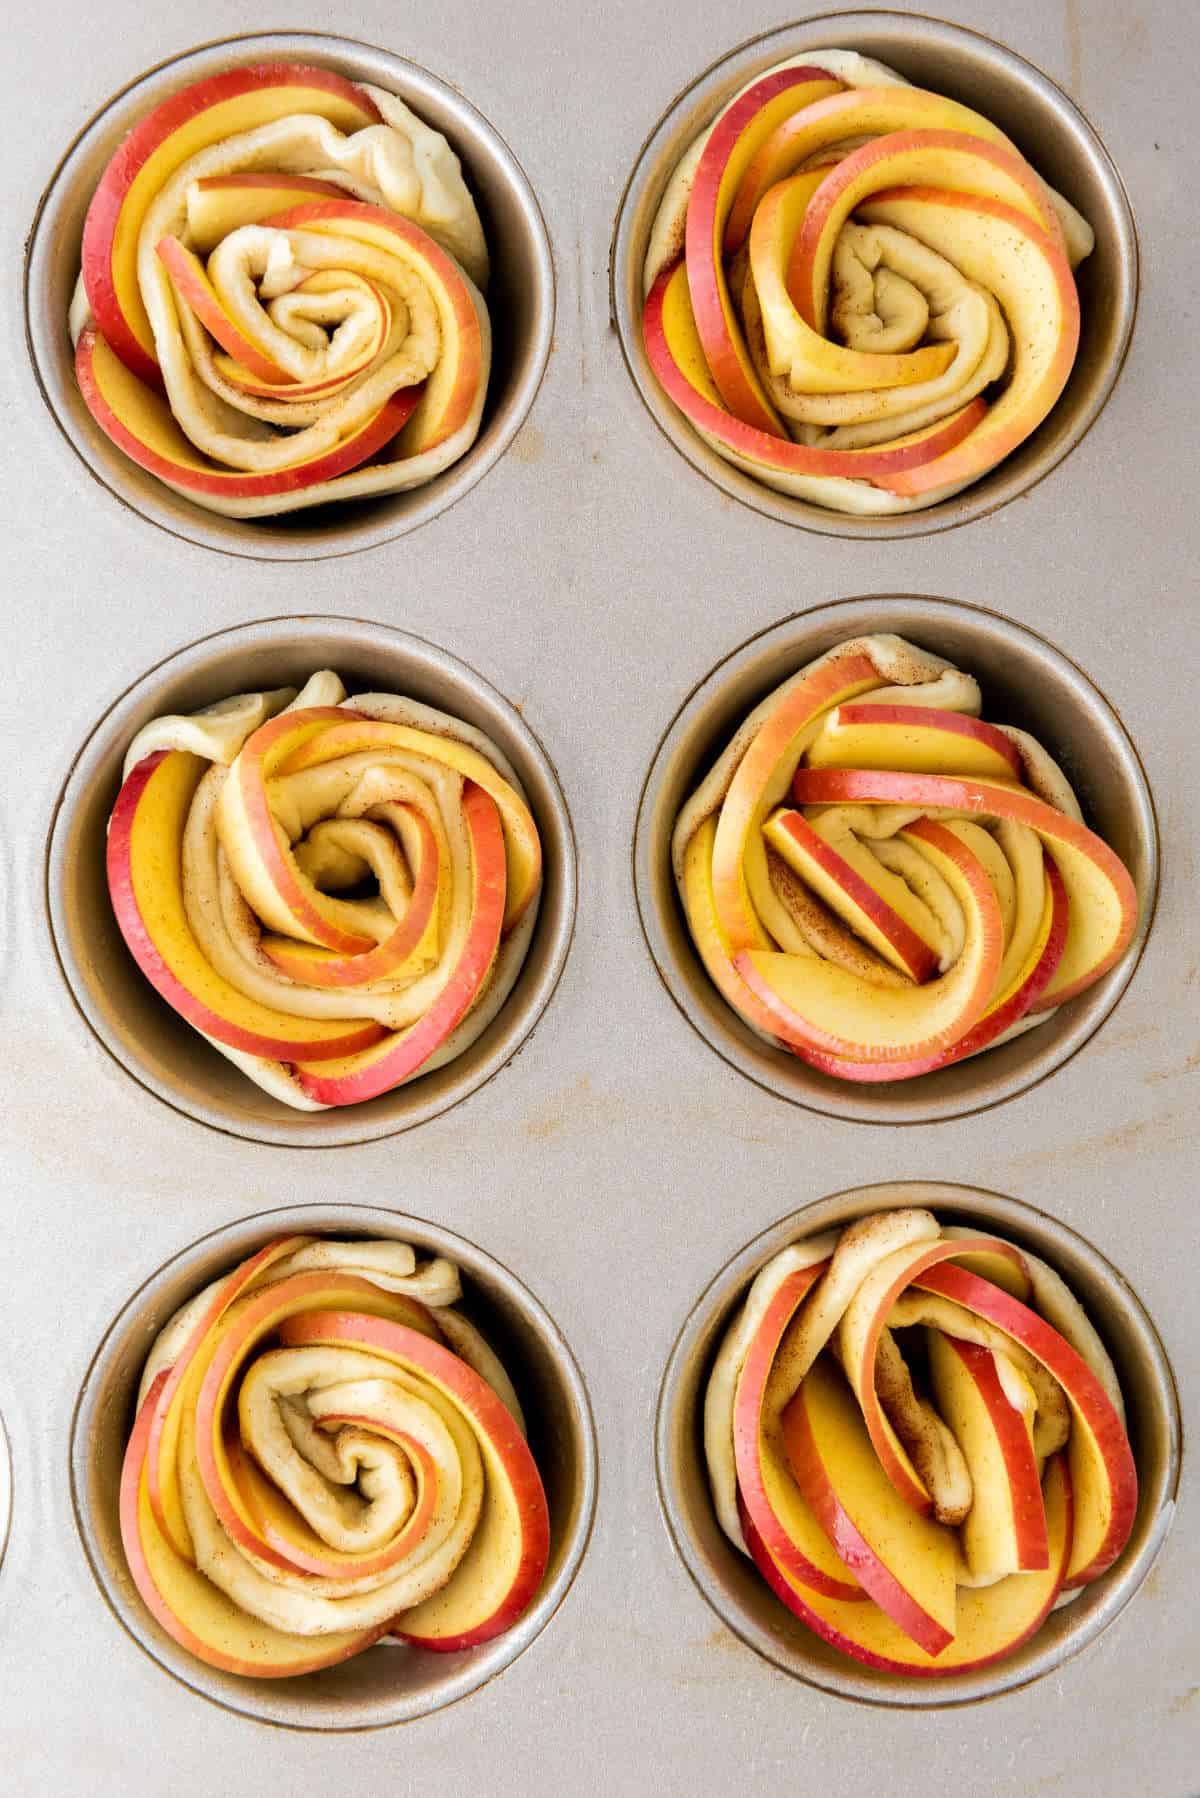 rosettes placed into cavities of a muffin pan.